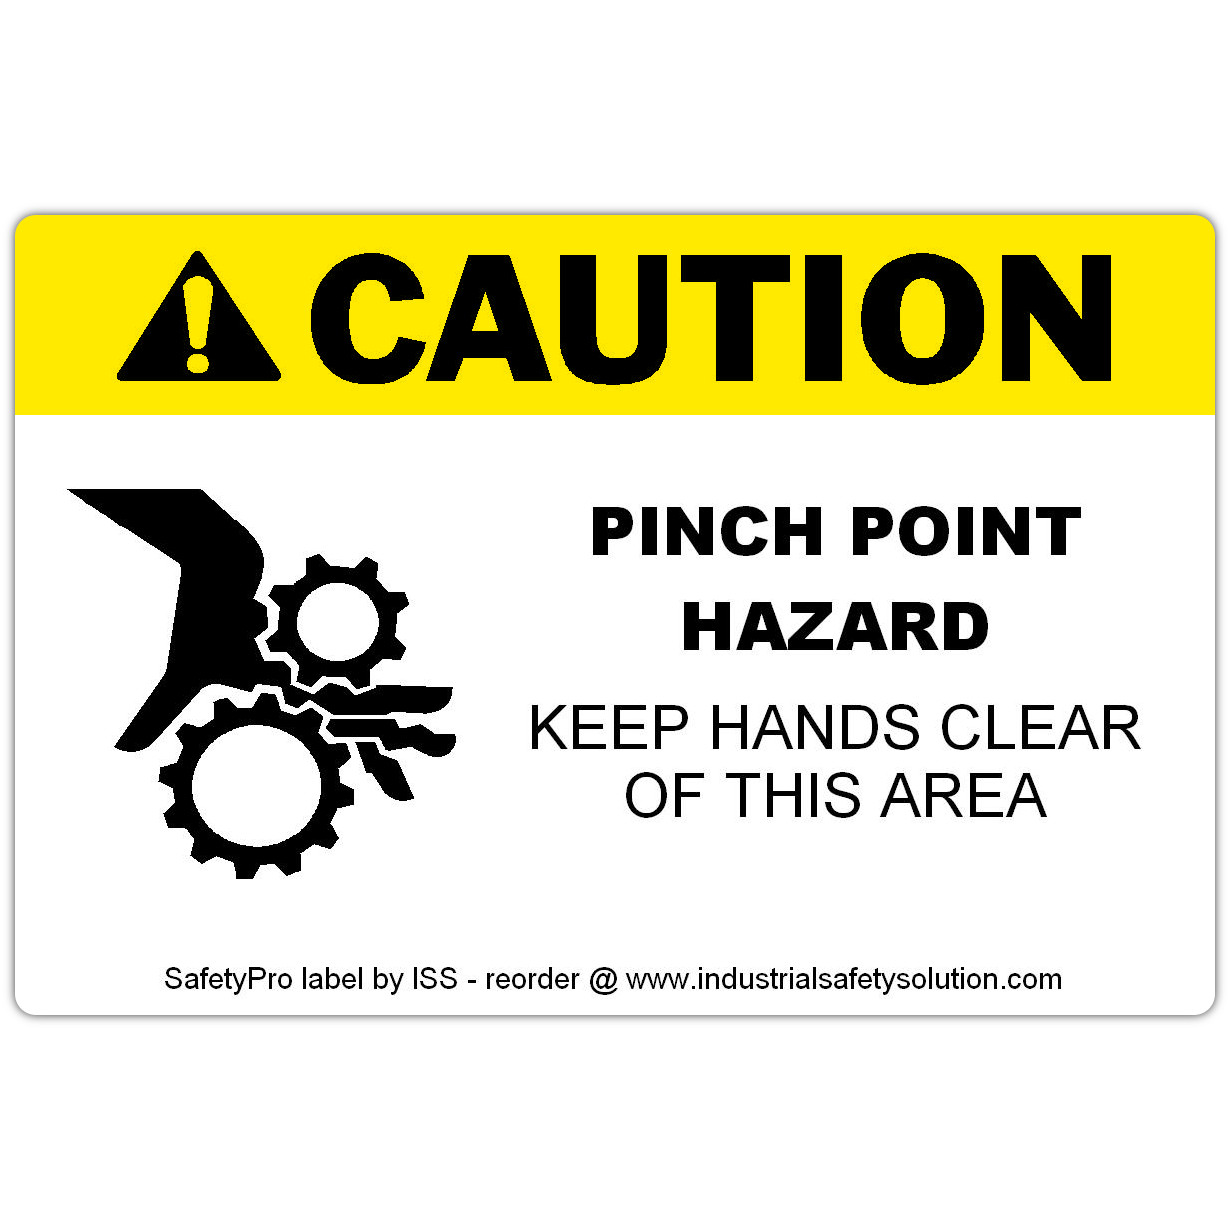 Ask a question about 4" x 6" CAUTION Pinch Point Safety Label